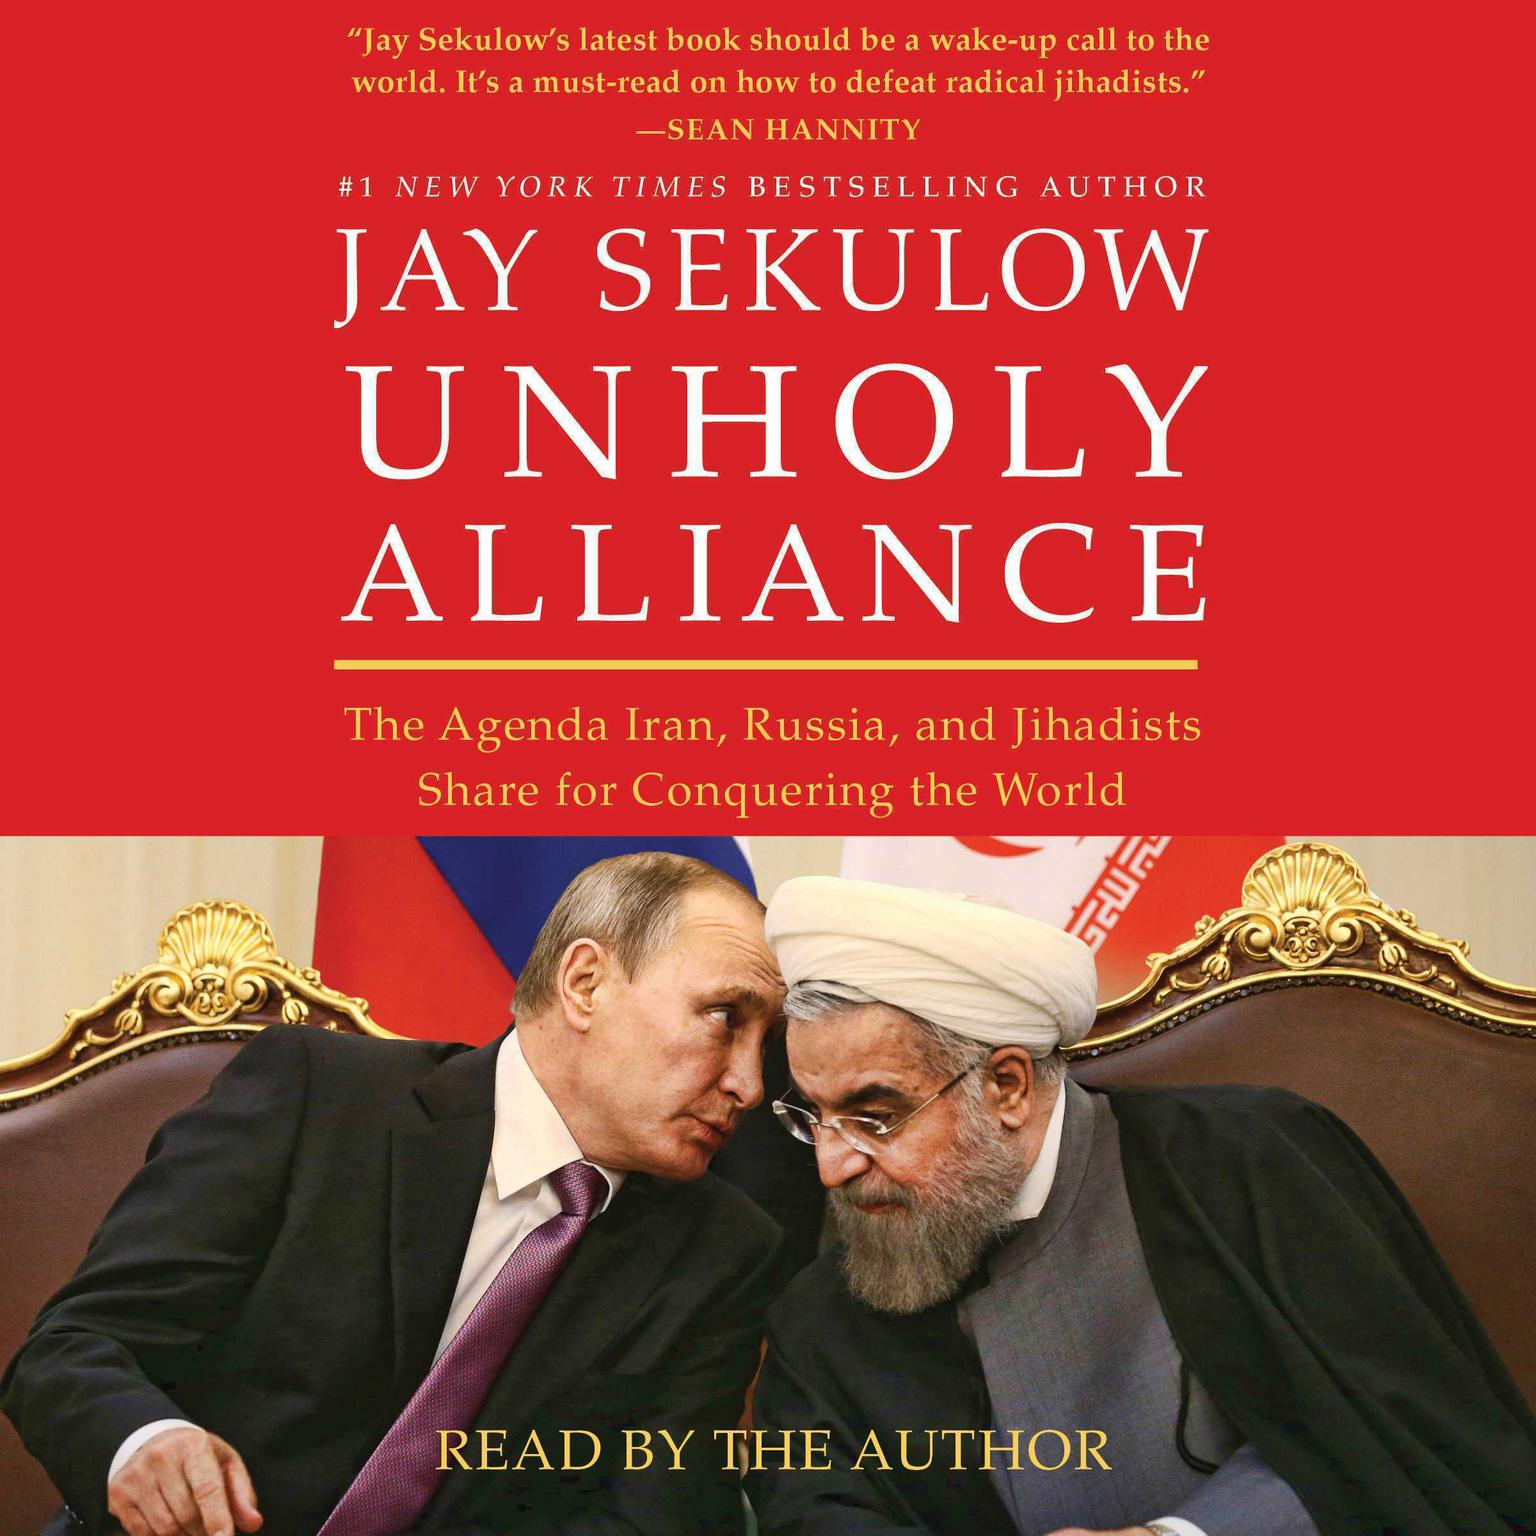 Unholy Alliance: The Agenda Iran, Russia, and Jihadists Share for Conquering the World Audiobook, by Jay Sekulow